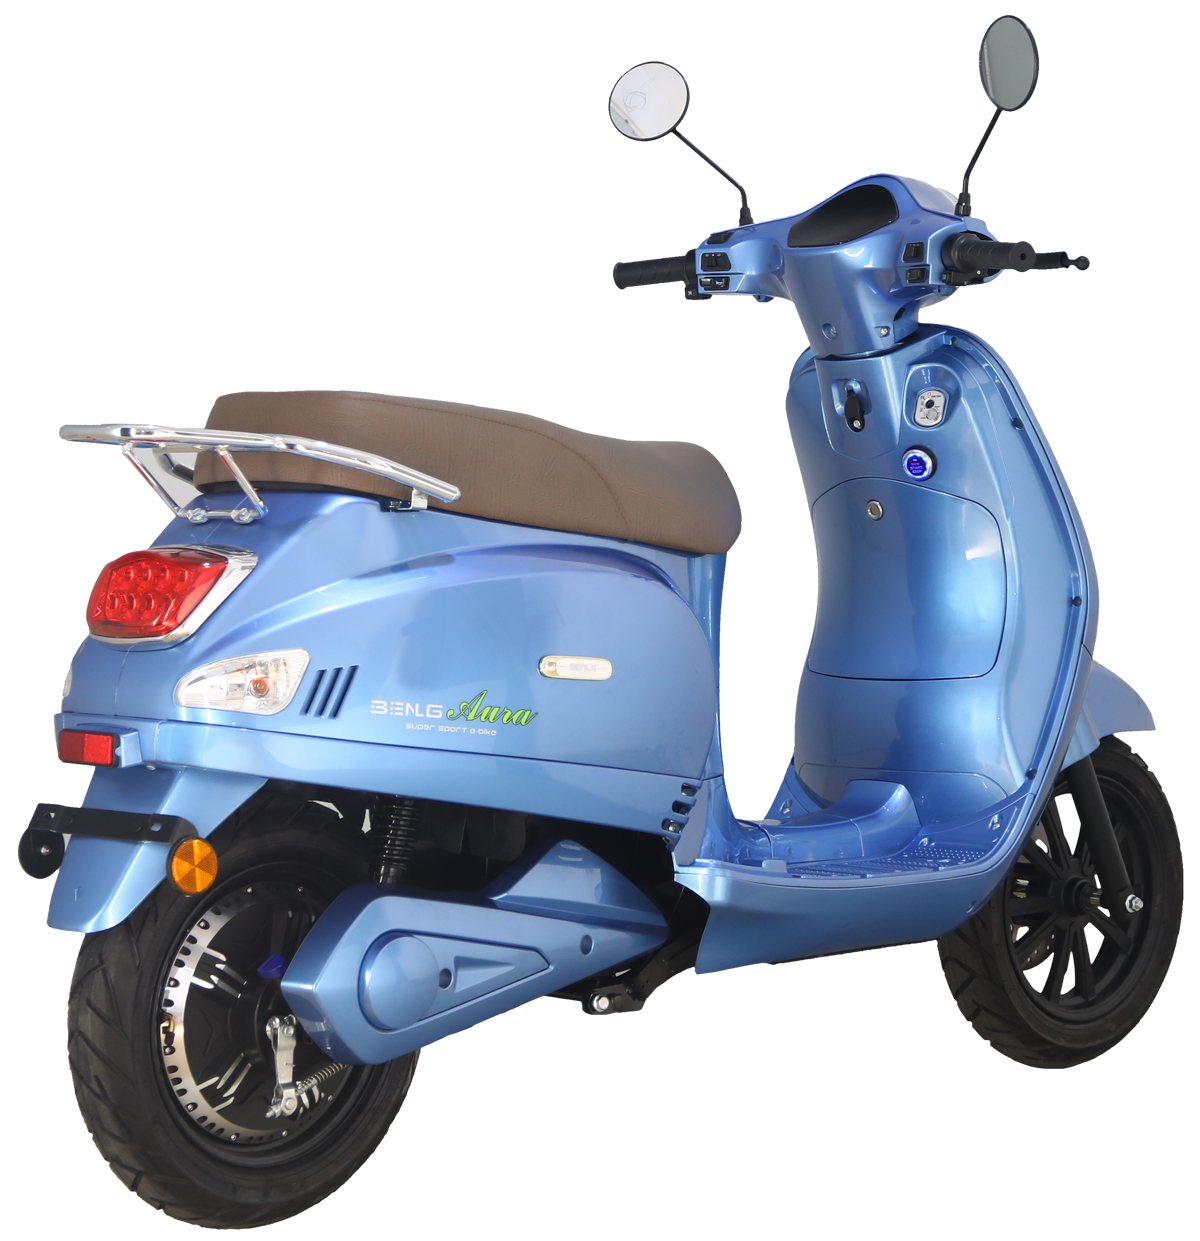 Supply 72V SUMMER Electric Scooter With LIFEPO4 Battery, 72V SUMMER Electric Scooter With LIFEPO4 Battery Factory Quotes, 72V SUMMER Electric Scooter With LIFEPO4 Battery Producers